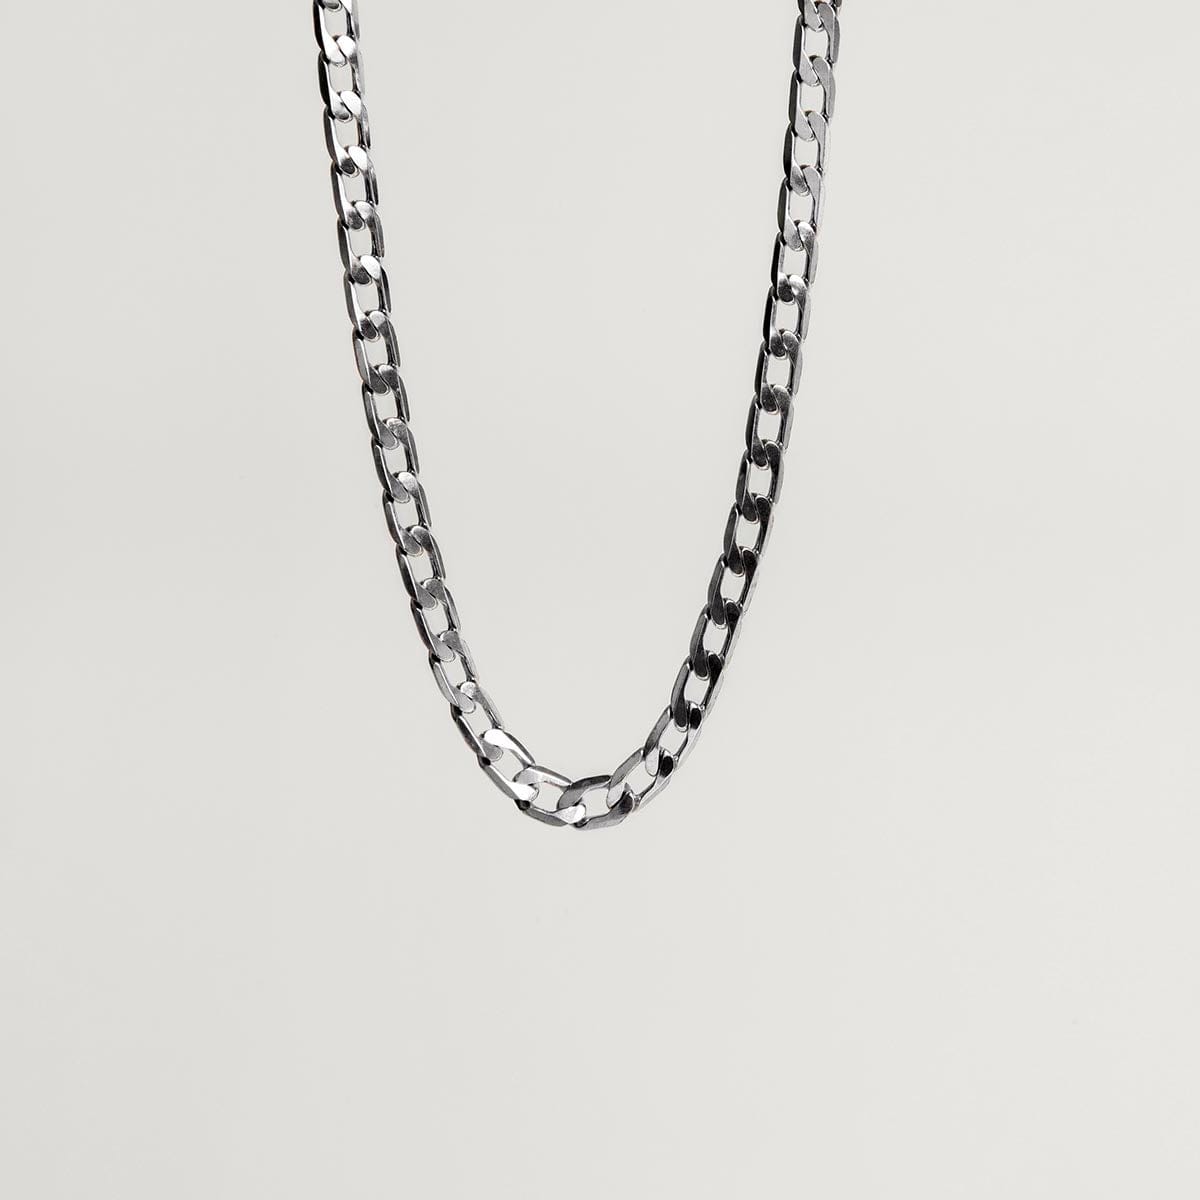 Twojeys necklaces Cuban Chain